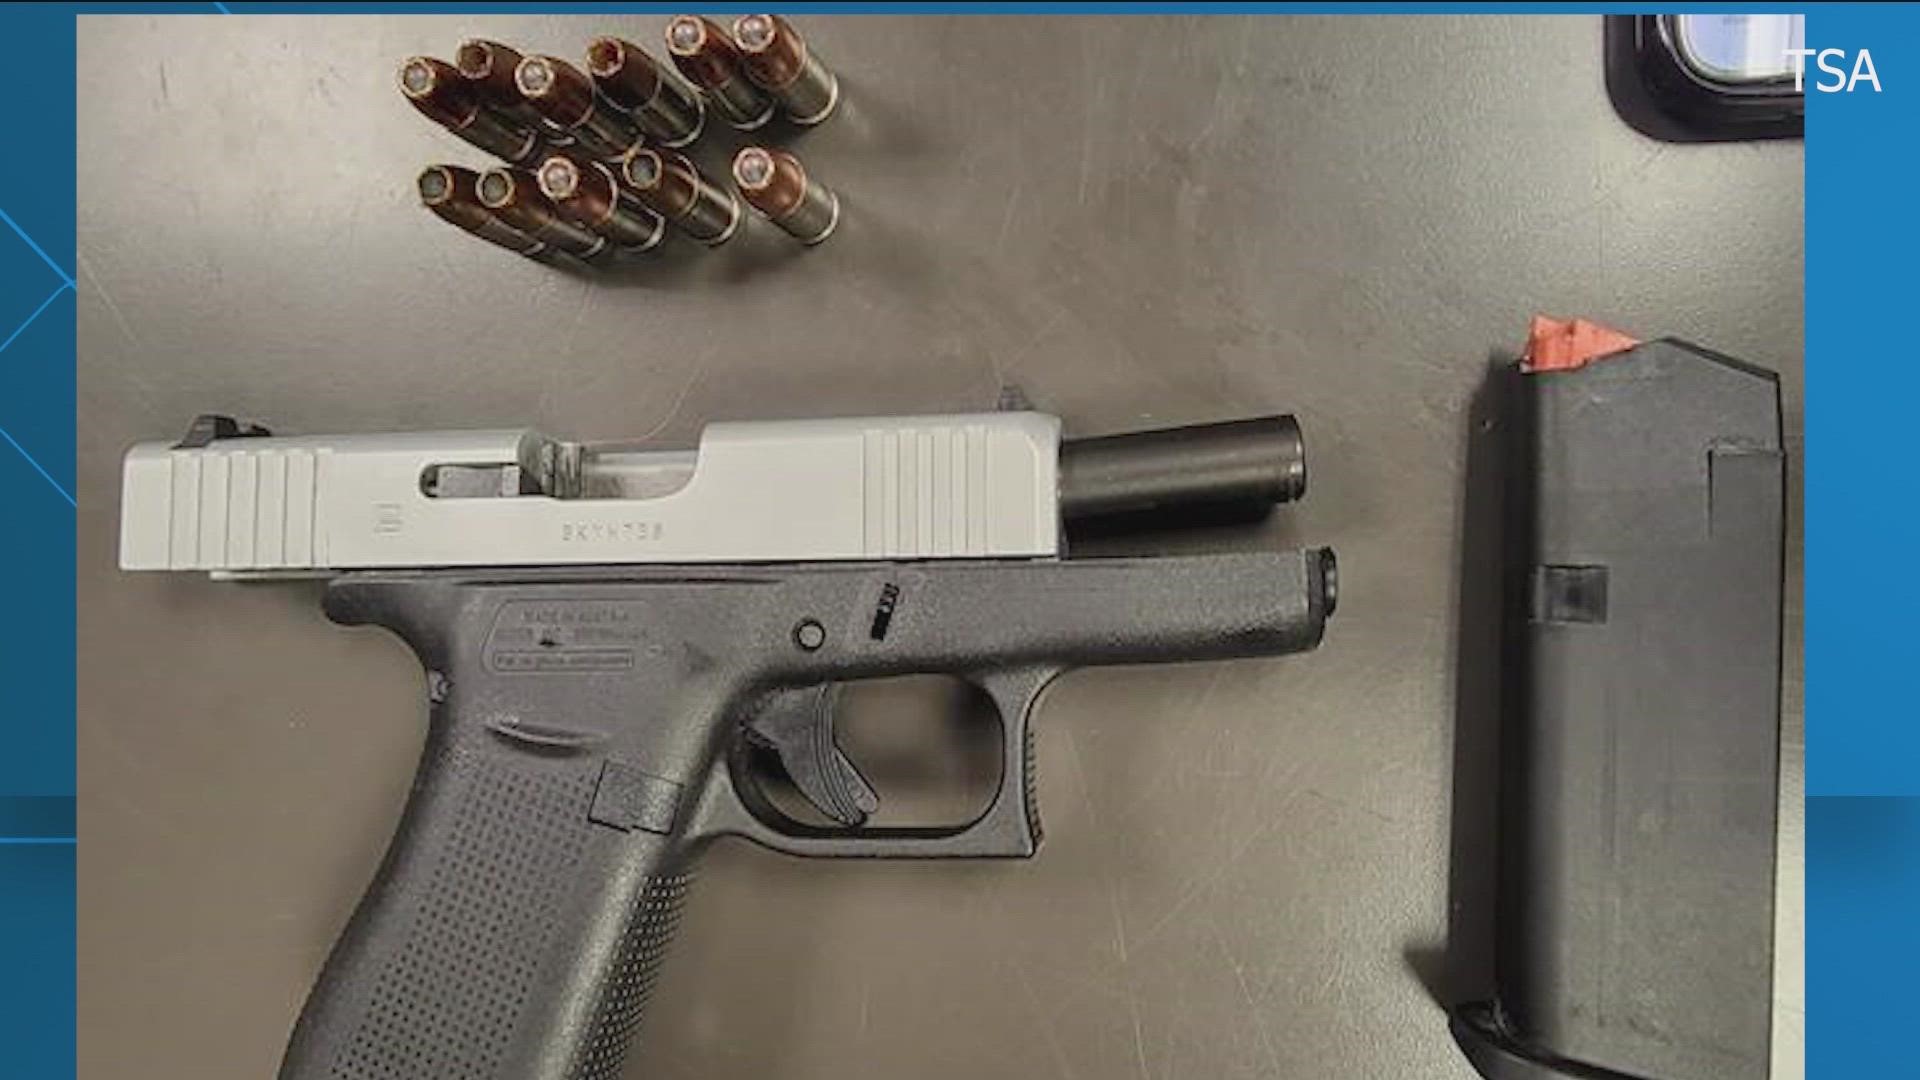 Just within the last week, TSA officers at Austin's airport have found six guns in carry-on luggage at security checkpoints.